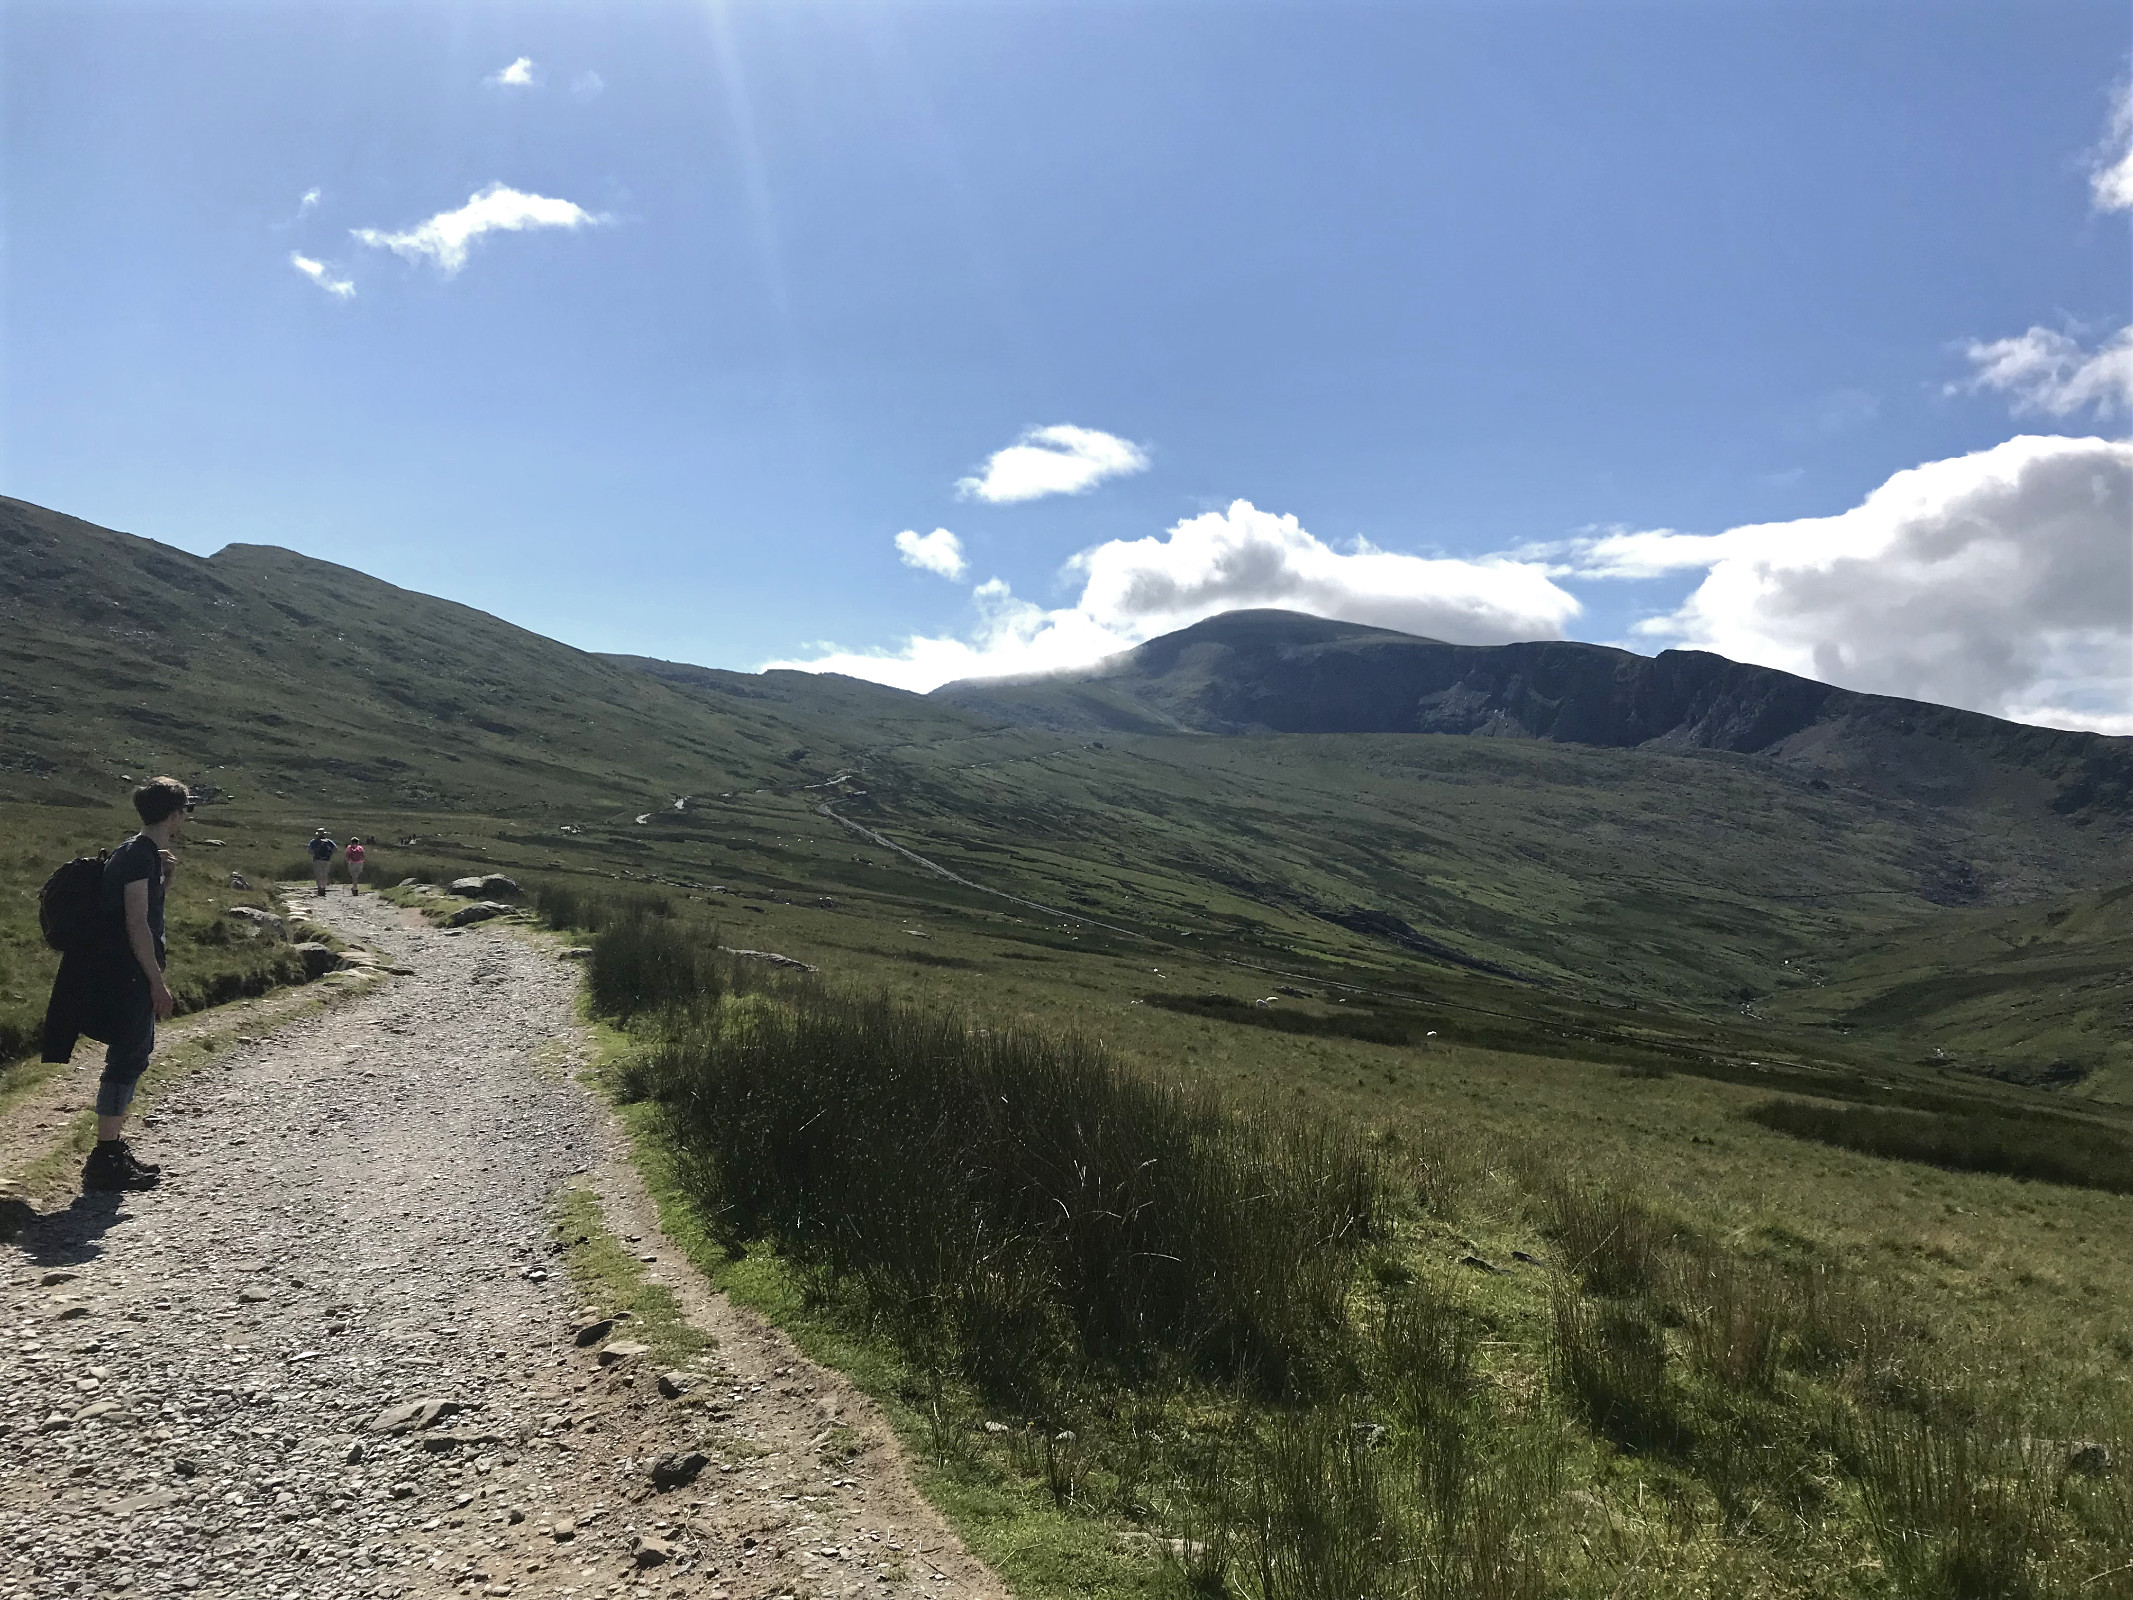 The long hike to Snowdon